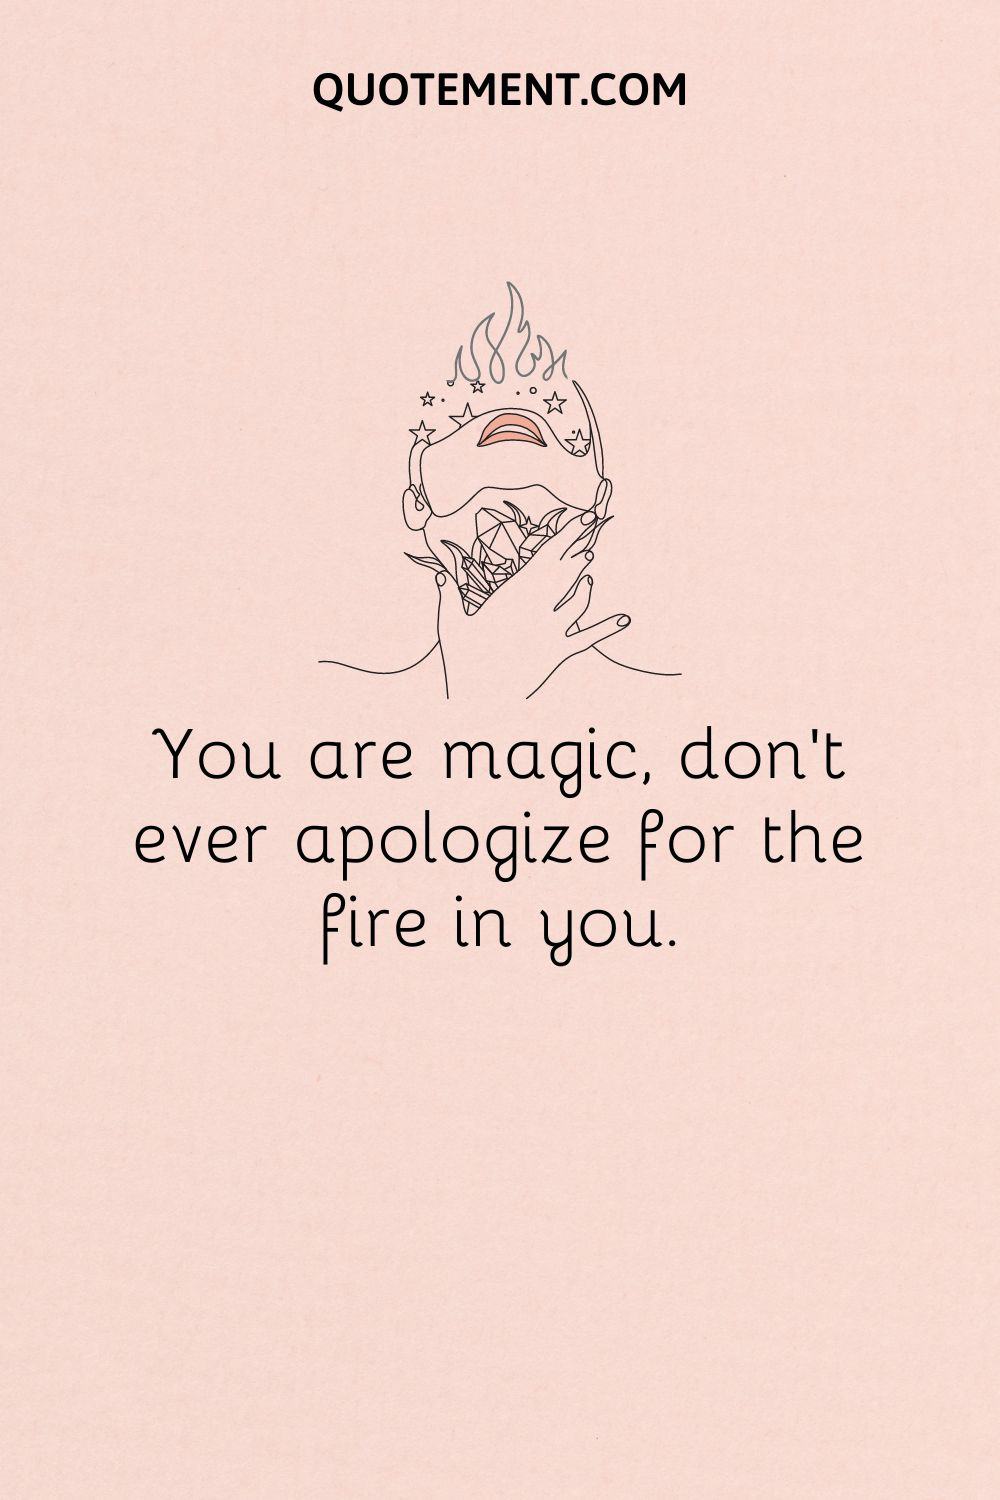 You are magic, don’t ever apologize for the fire in you